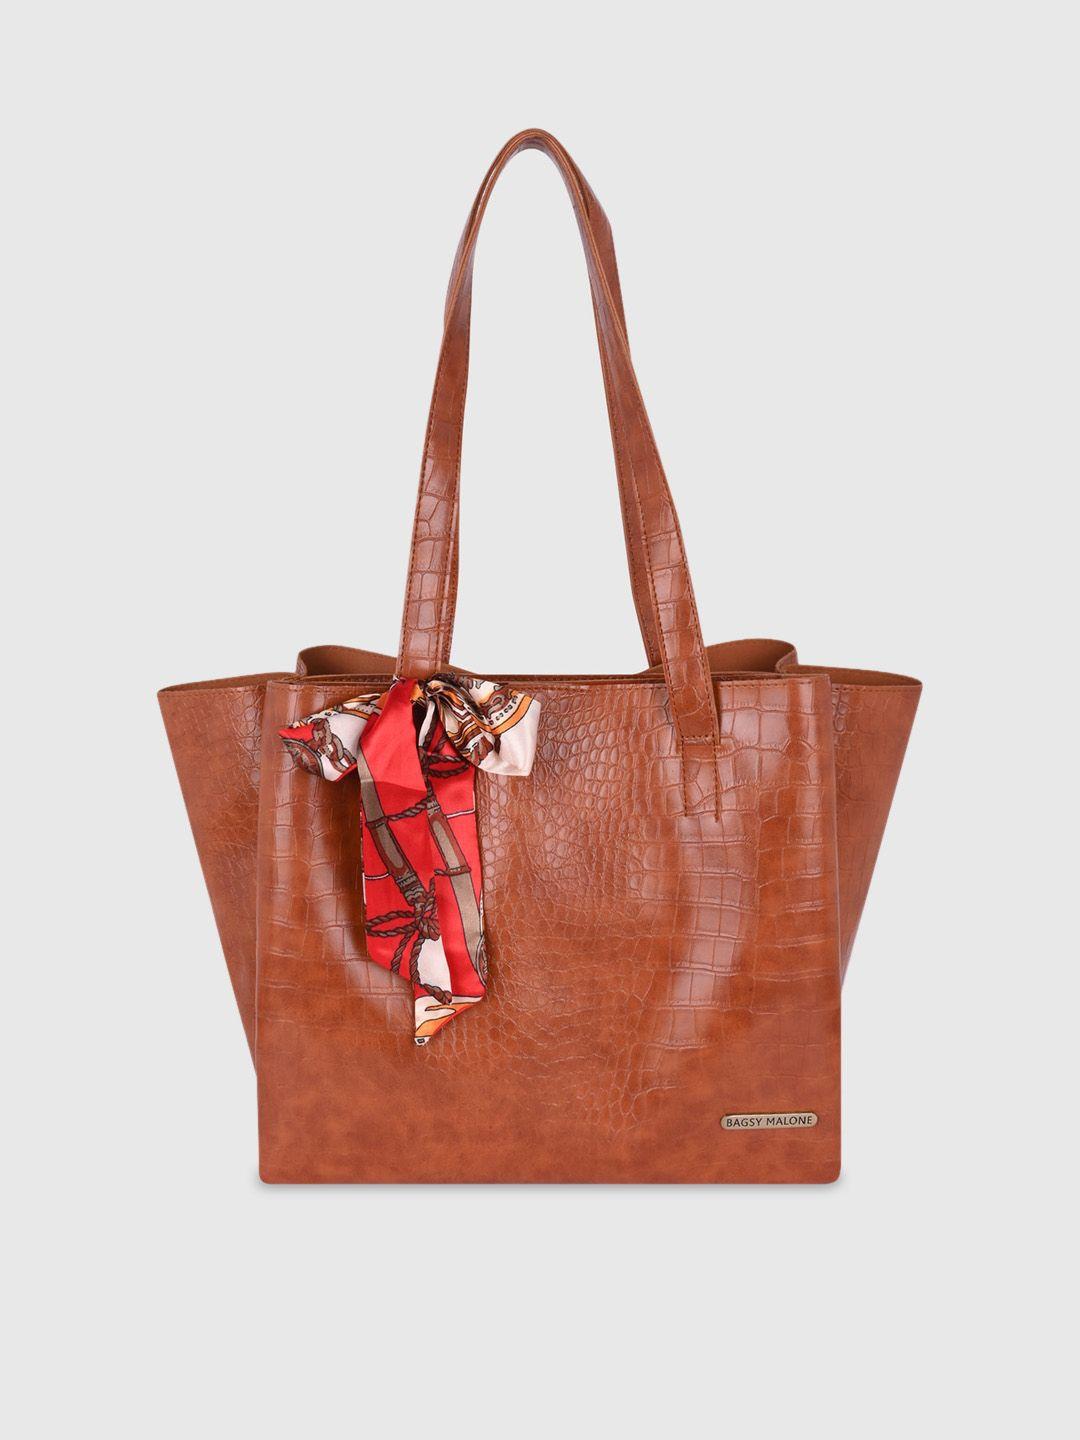 bagsy malone animal textured shopper tote bag with bow detail